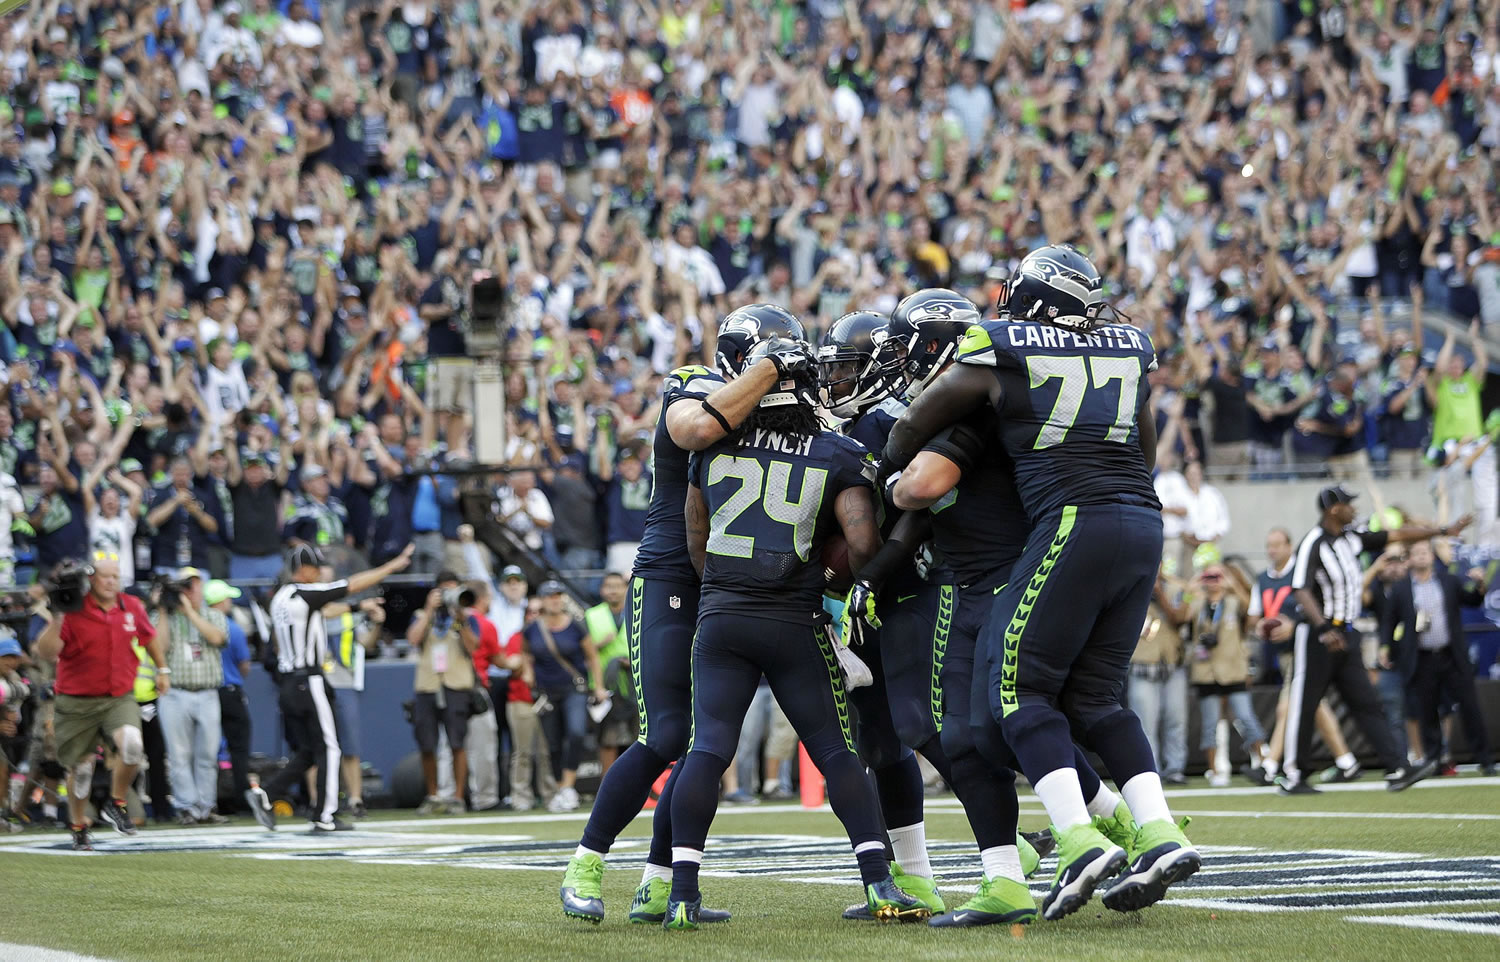 Fans cheer as Seattle Seahawks running back Marshawn Lynch (24) celebrates with teammates after Lynch scored the game-winning touchdown in overtime of an NFL football game against the Denver Broncos, Sunday, Sept. 21, 2014, in Seattle. The Seahawks won 26-20.